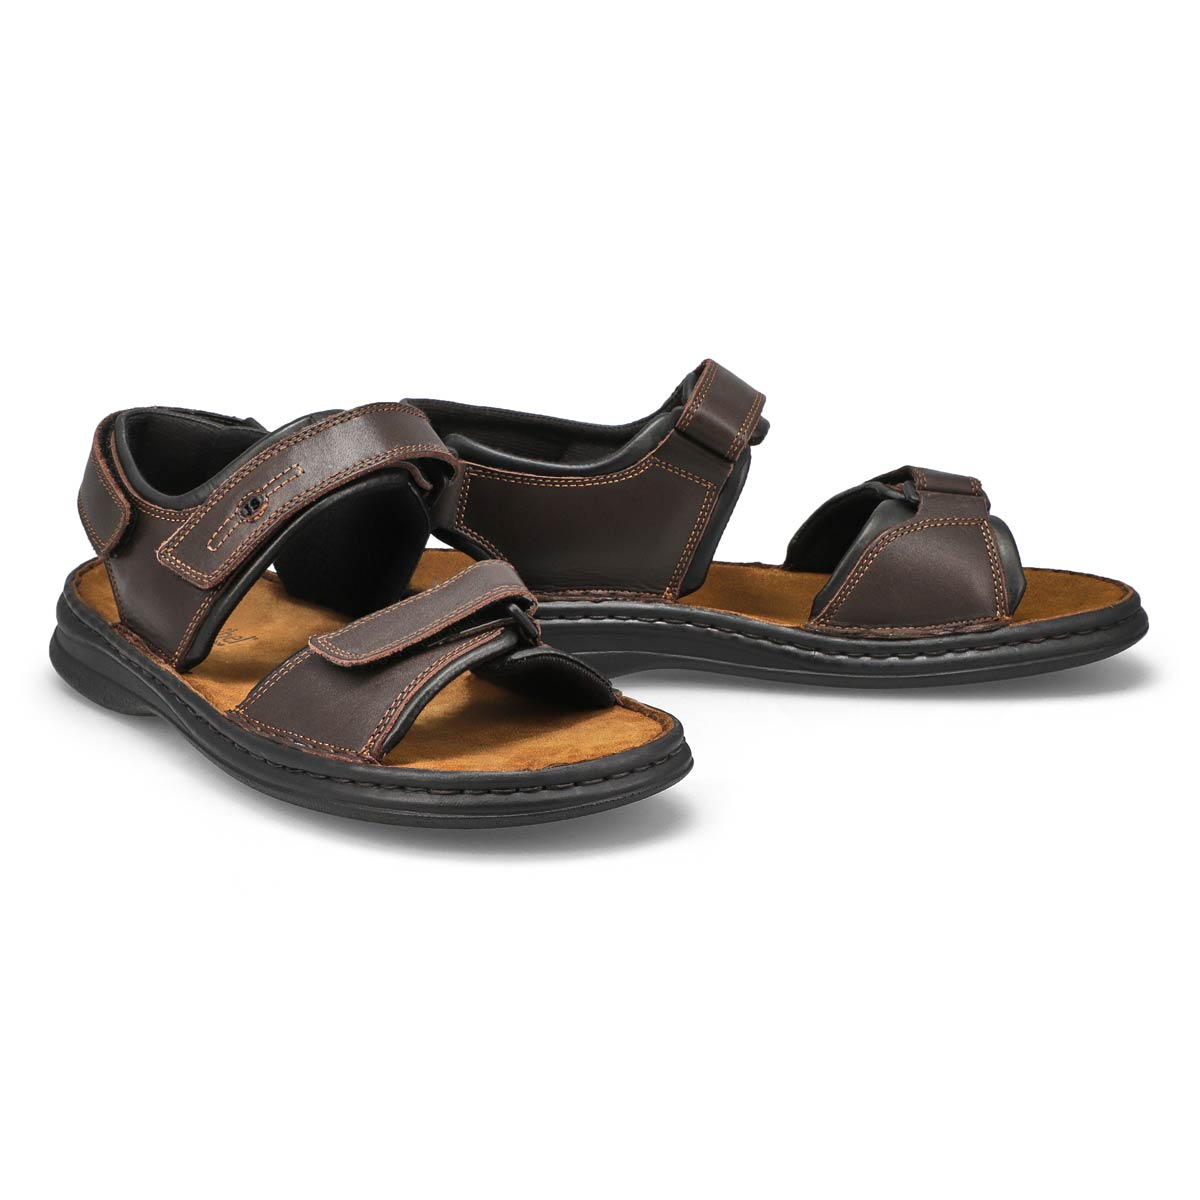 Men's Rafe Leather Casual Sandal Wide - Brown